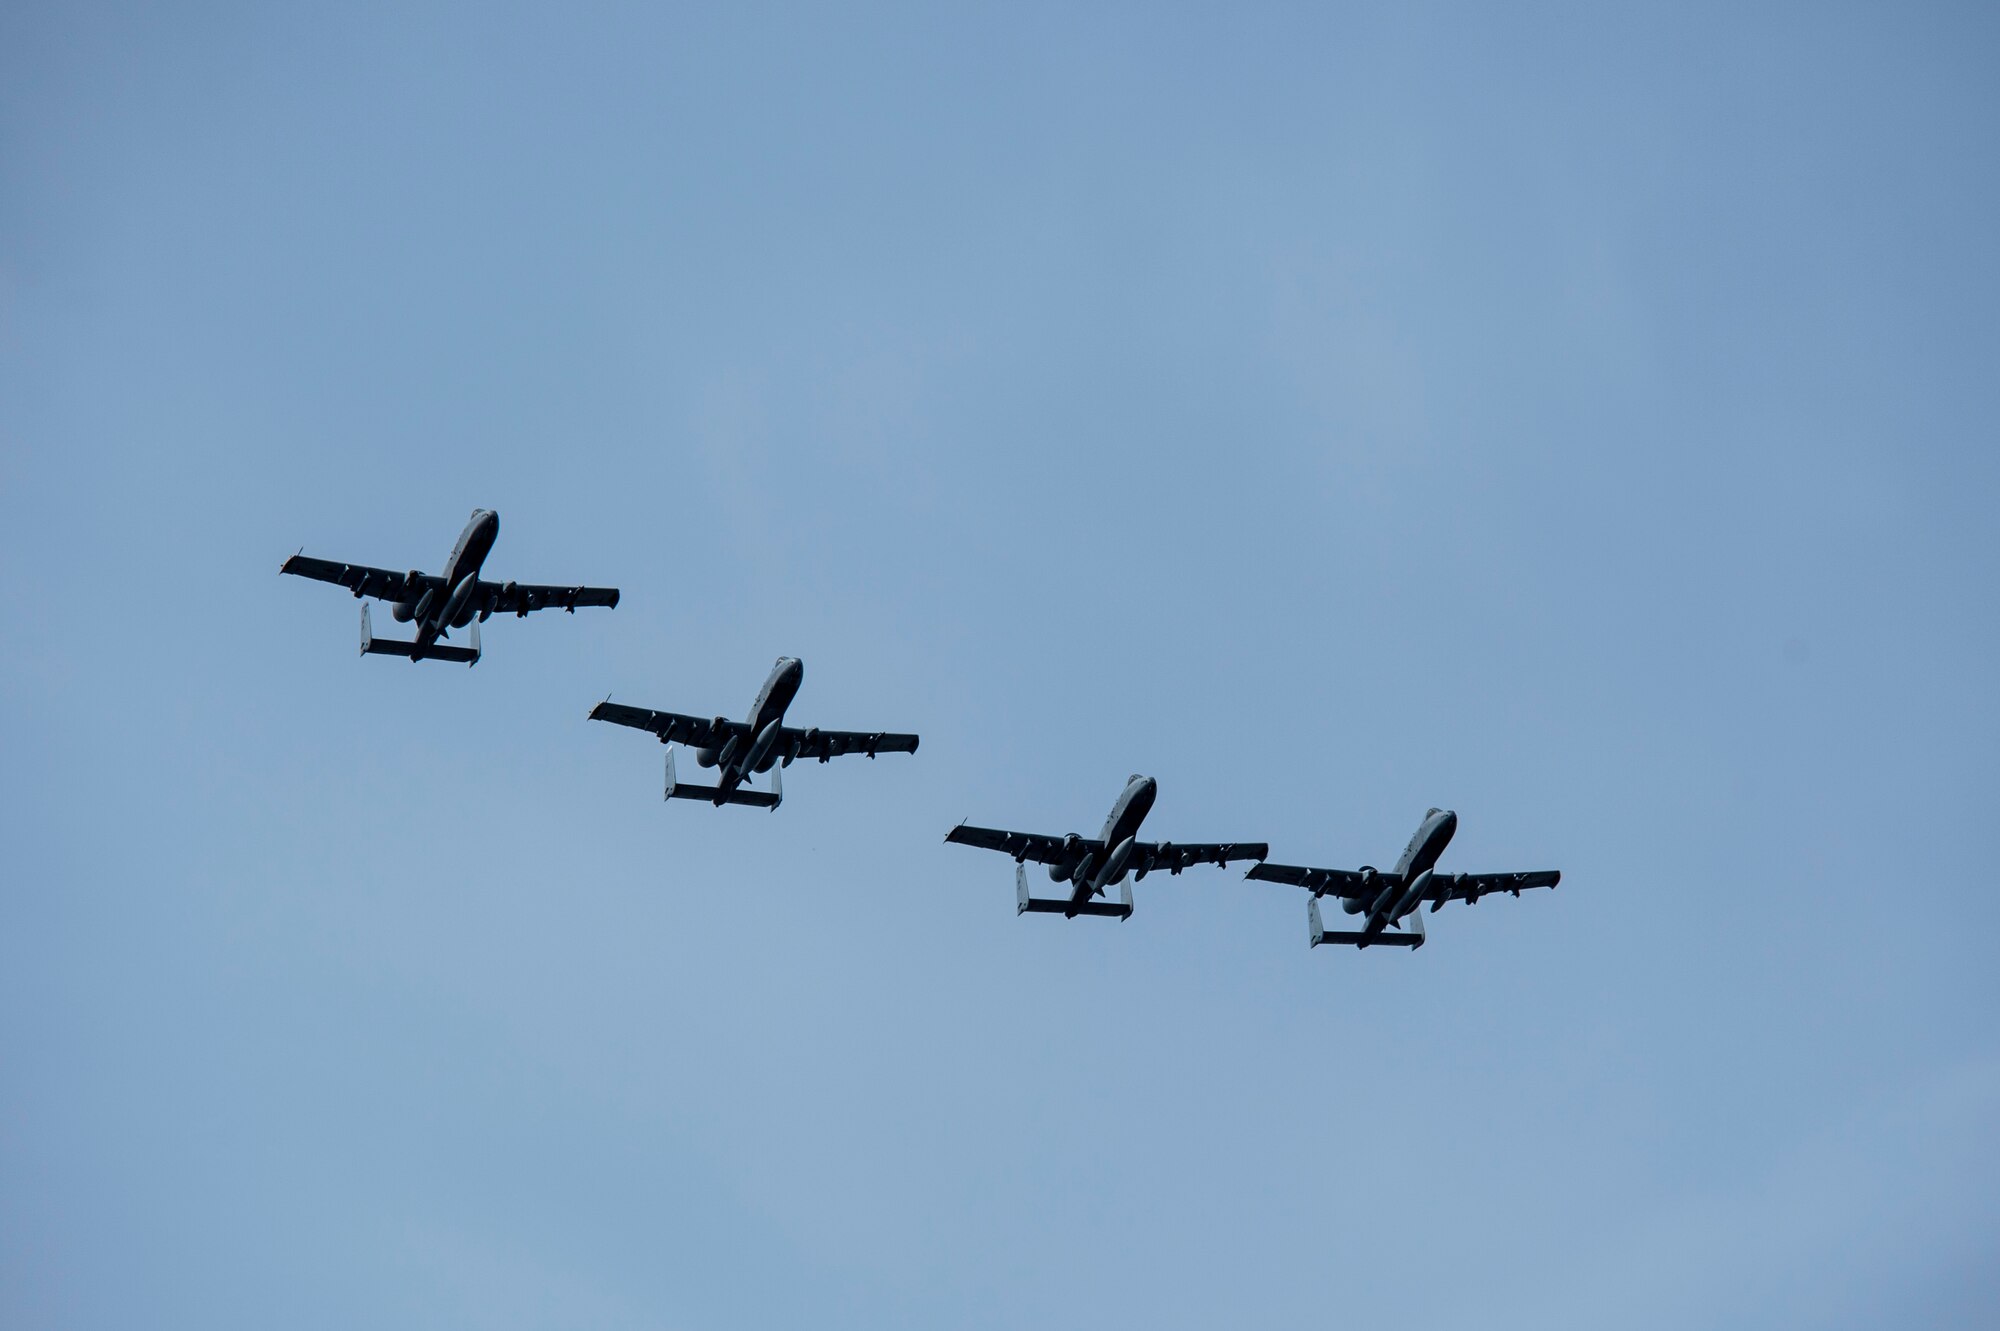 Four A-10 Thunderbolt II attack aircraft fly over Ämari Air Base, Estonia, May 1, 2015. The U.S. is committed to acting collectively with NATO allies and the international community to address security challenges in Europe and around the world. (U.S. Air Force photo by Senior Airman Rusty Frank/Released)